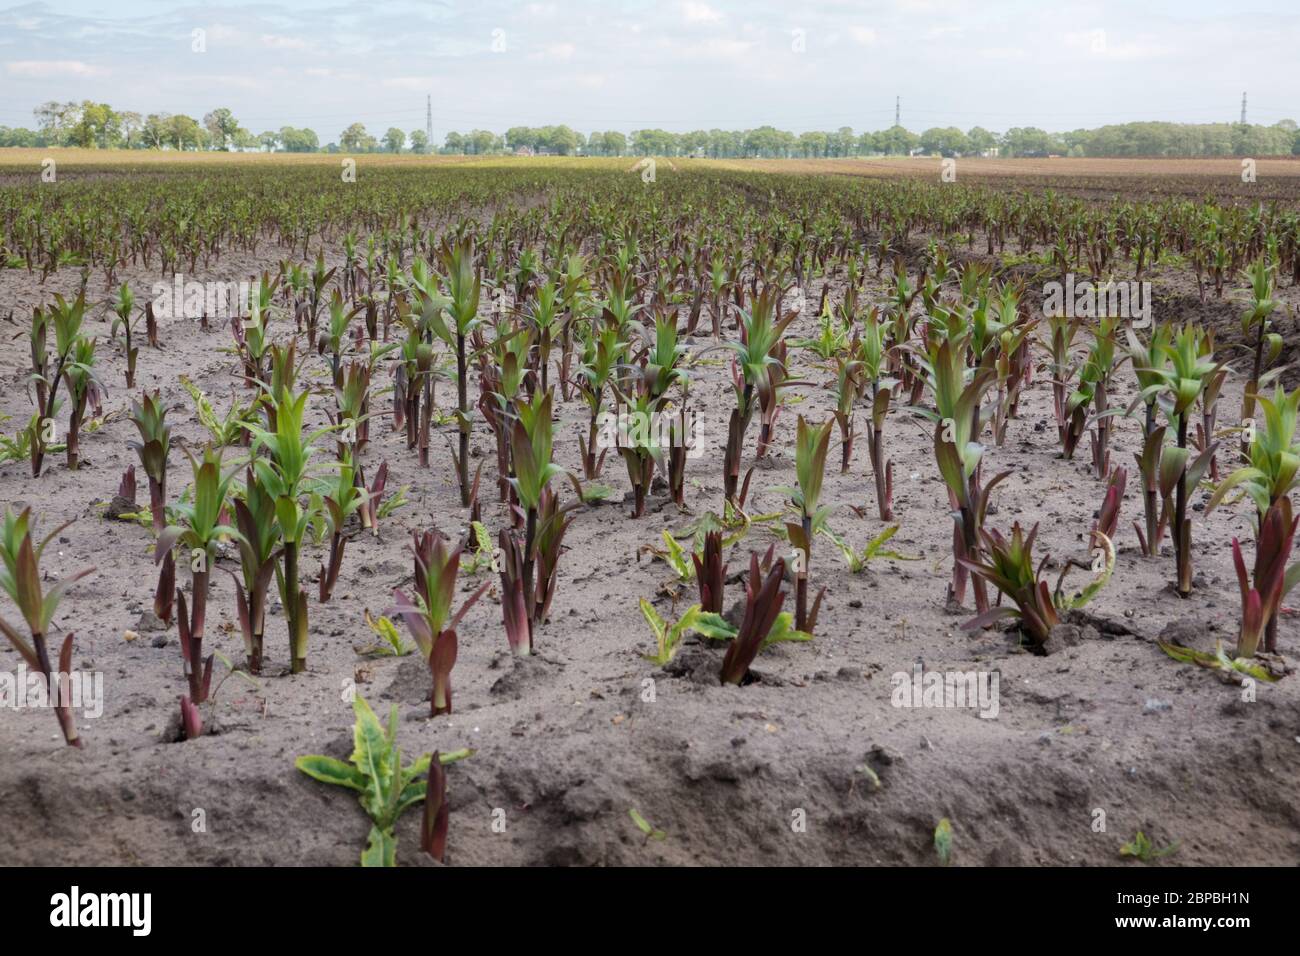 Drought: cultivation of Lilies in agriculture on a sandy, dry field under a blue sky with clouds Stock Photo